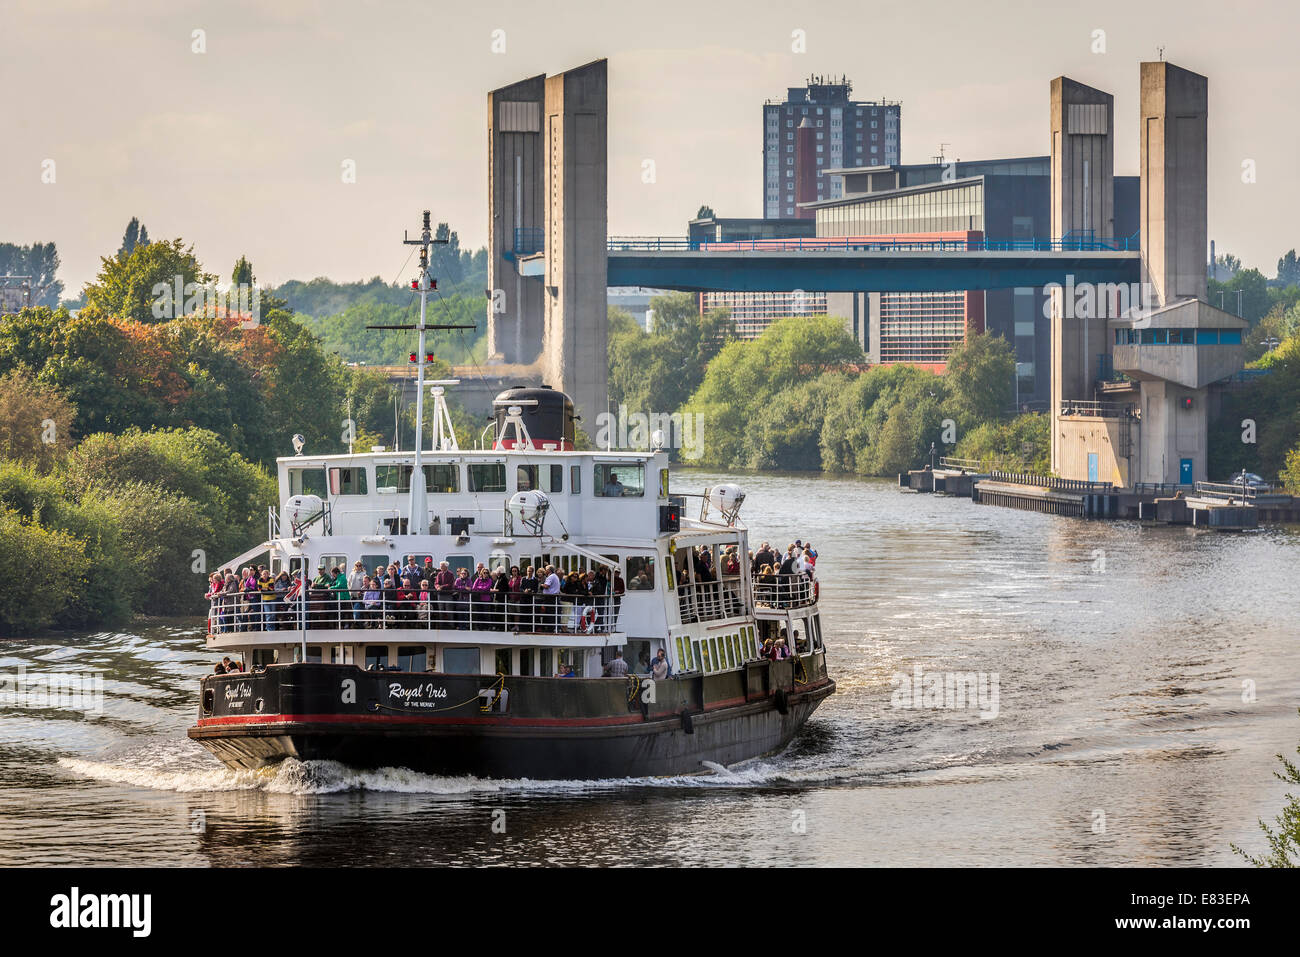 The Manchester Ship canal Centenary bridge with the Merseytravel ferry The Royal Iris at Salford. Stock Photo